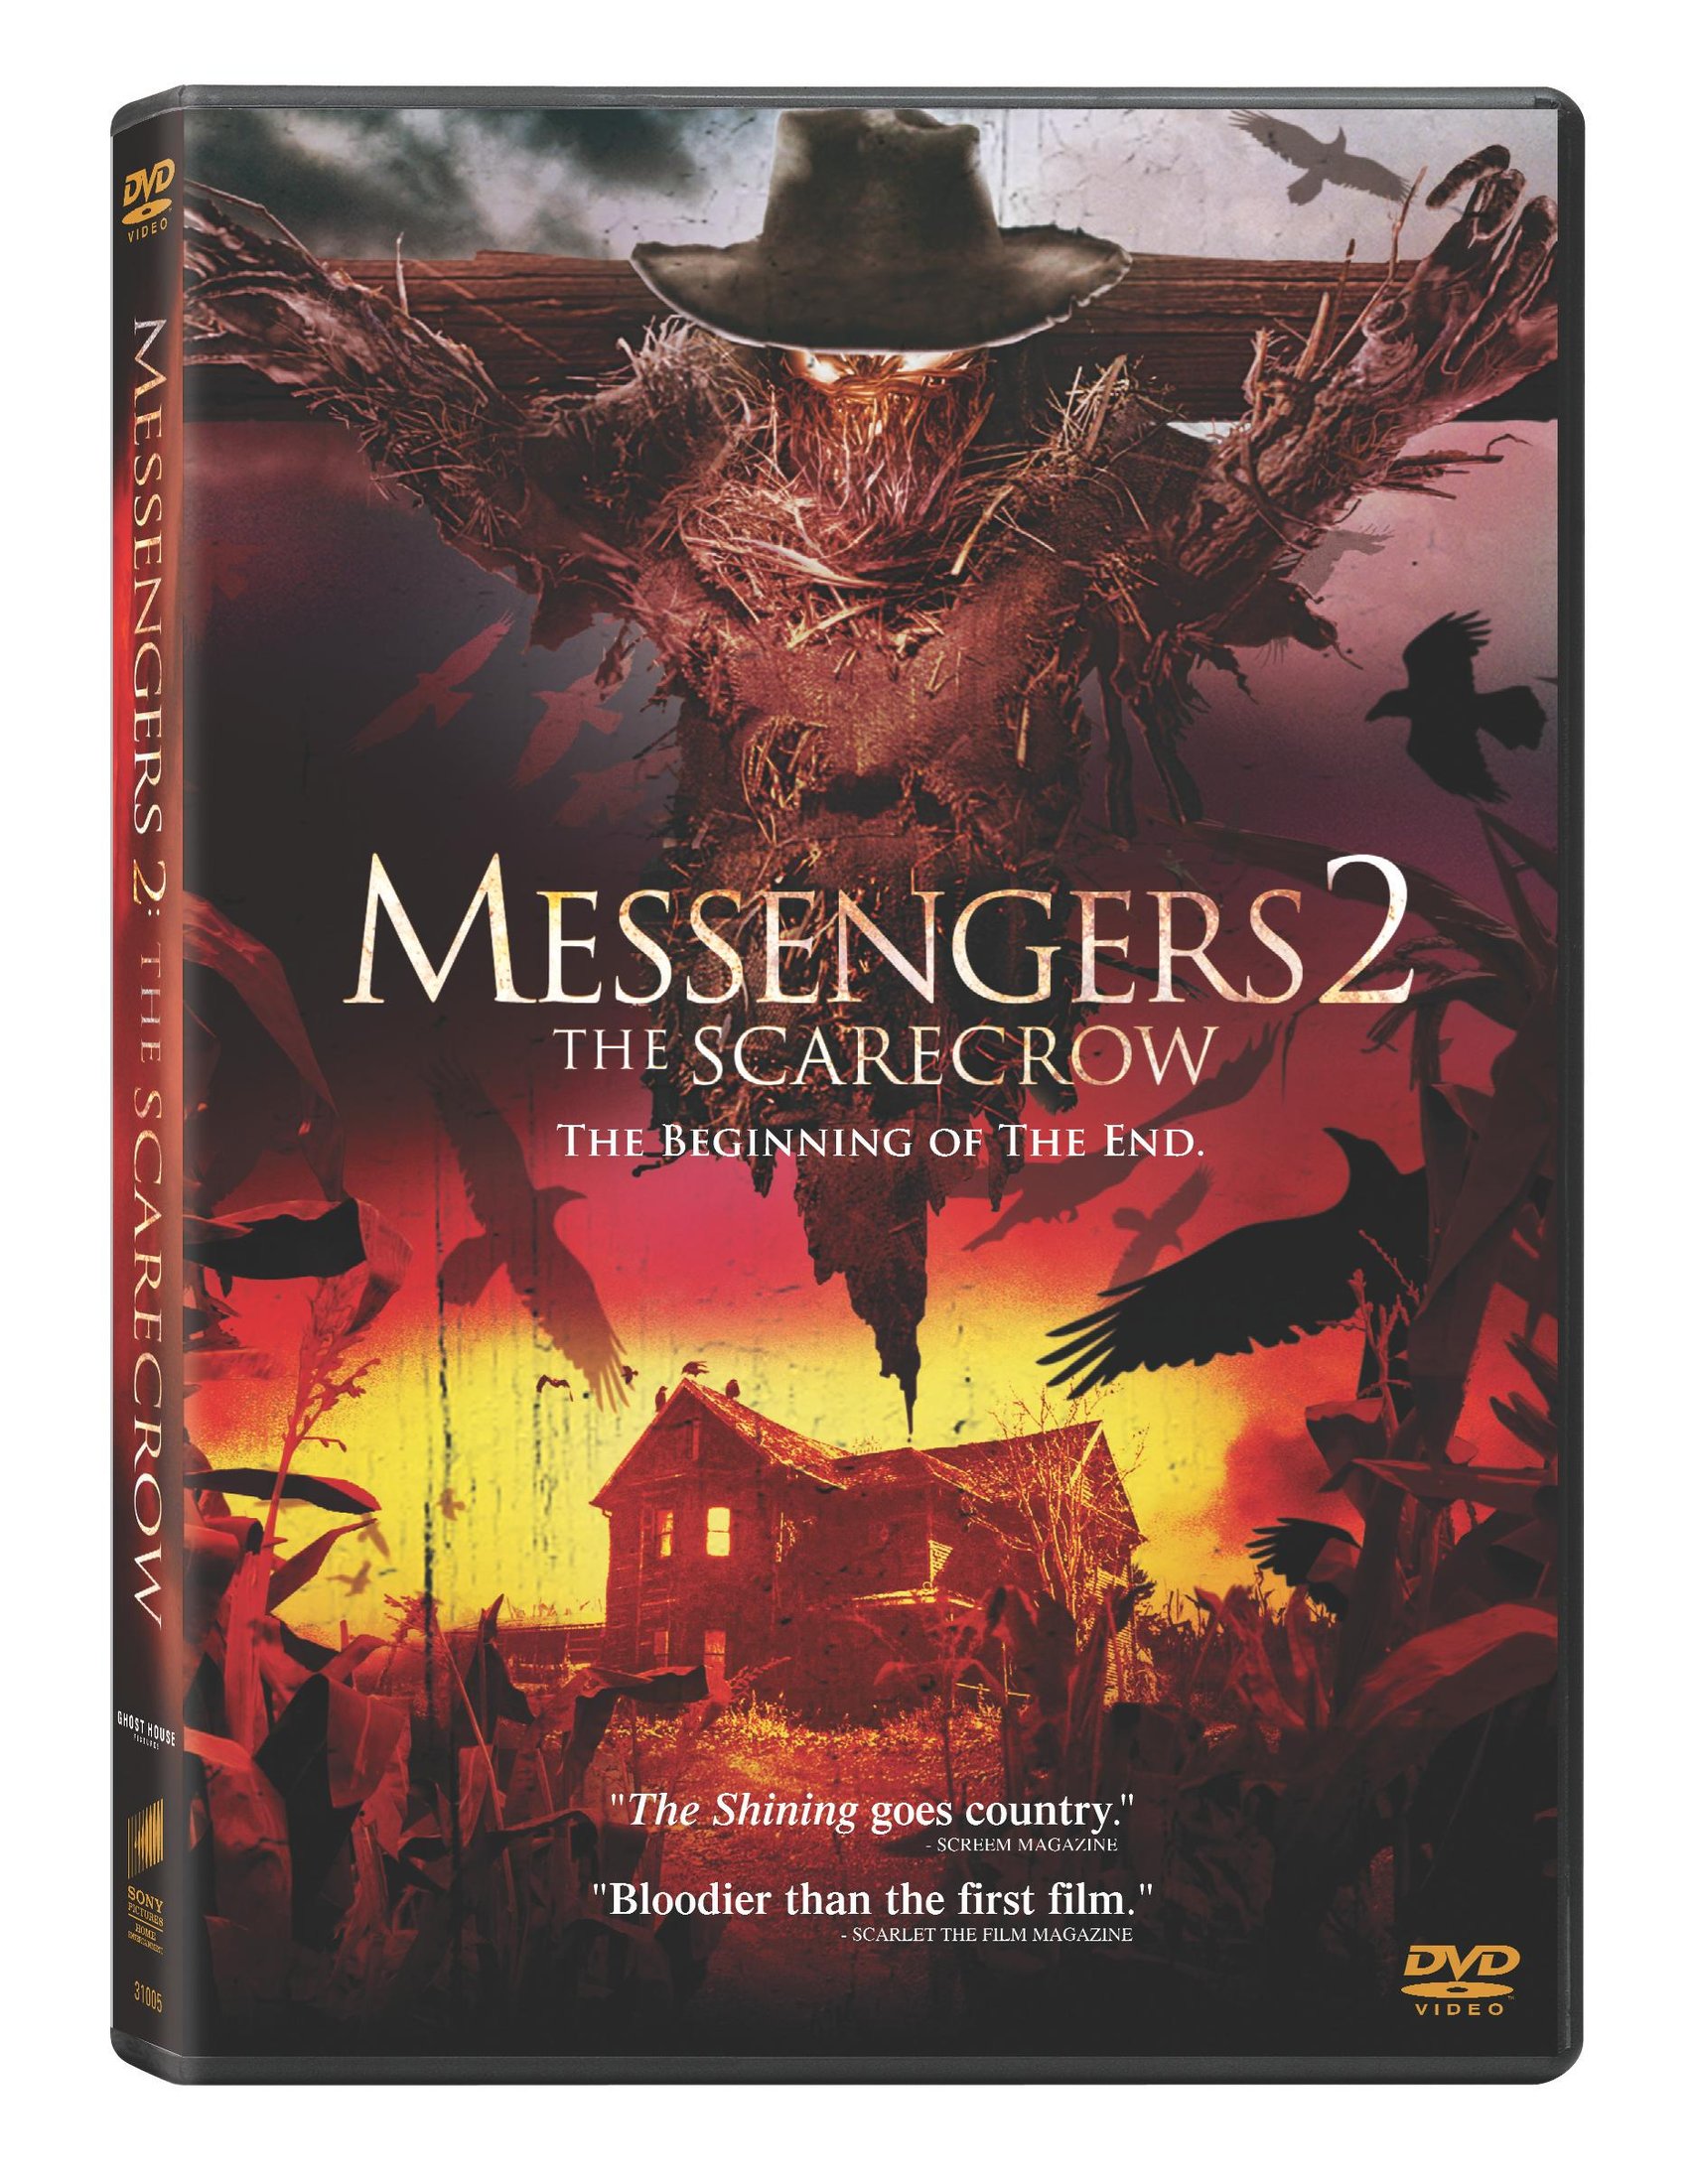 Messengers 2 The Scarecrow (2009) DVDRiP XviD-GFW (movies)